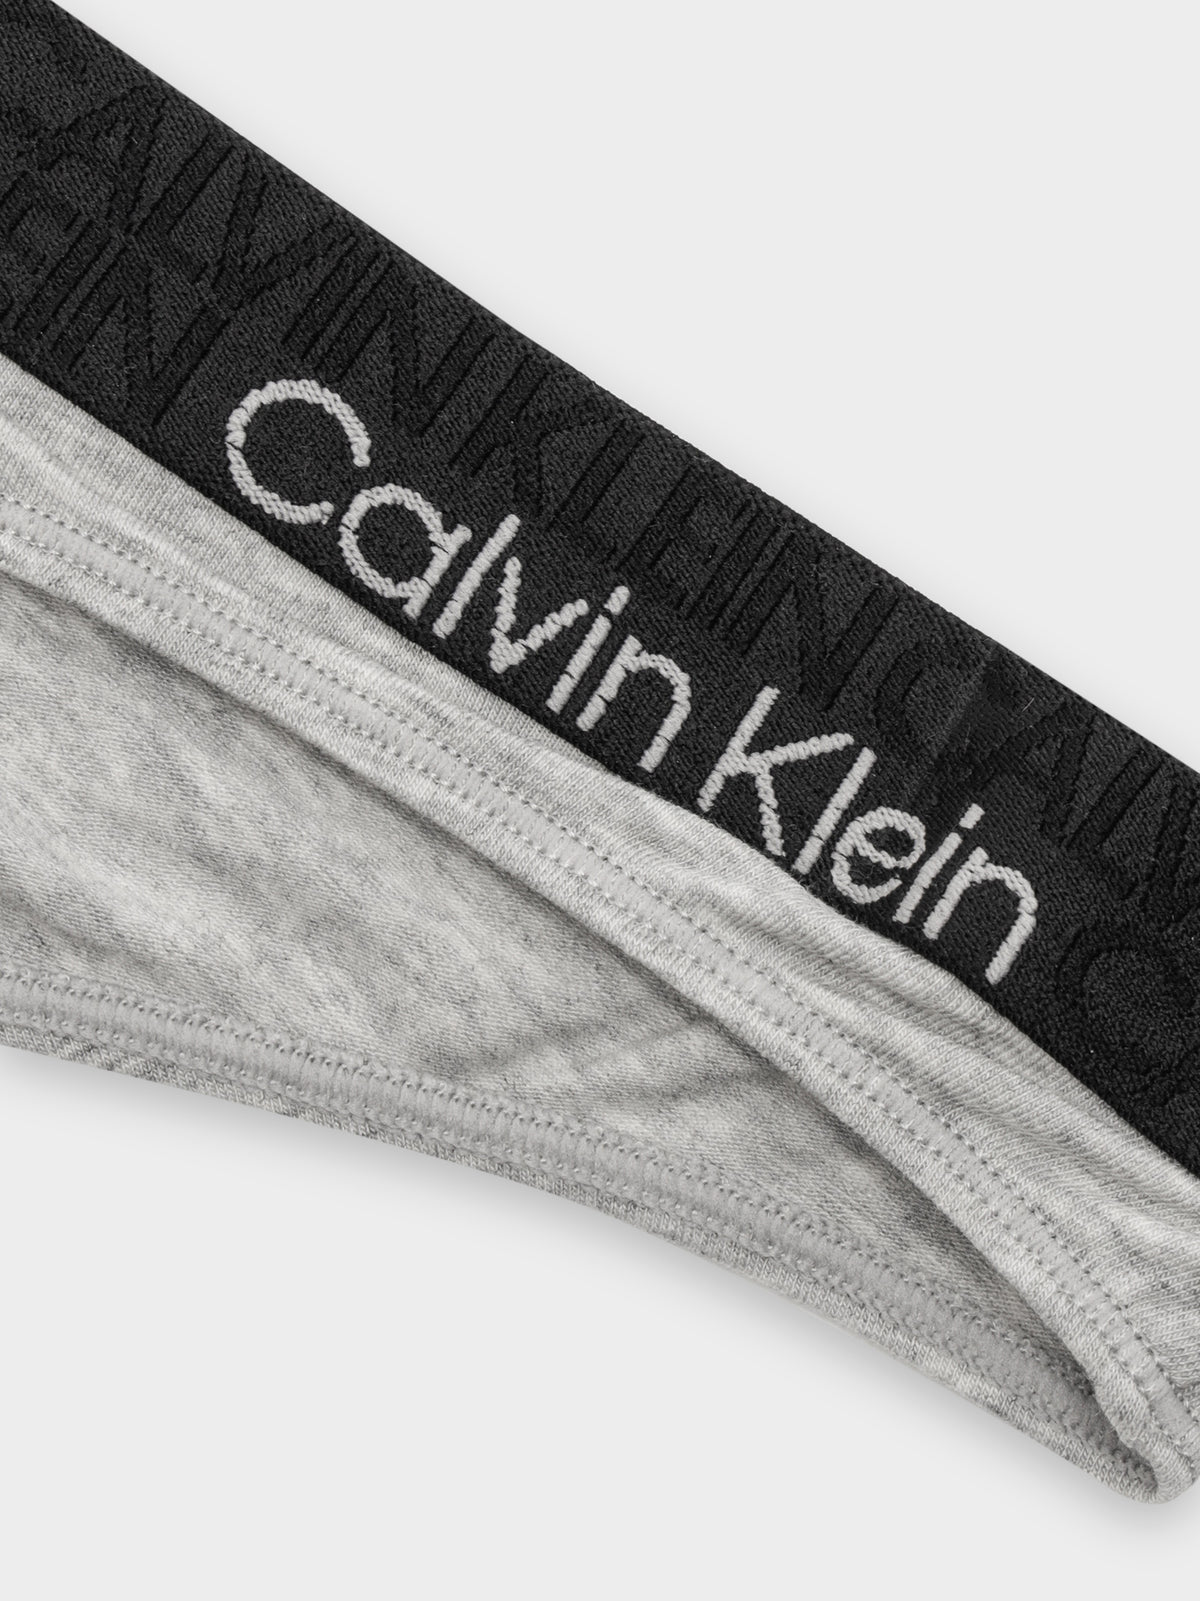 Reconsidered Comfort Thong in Grey Heather